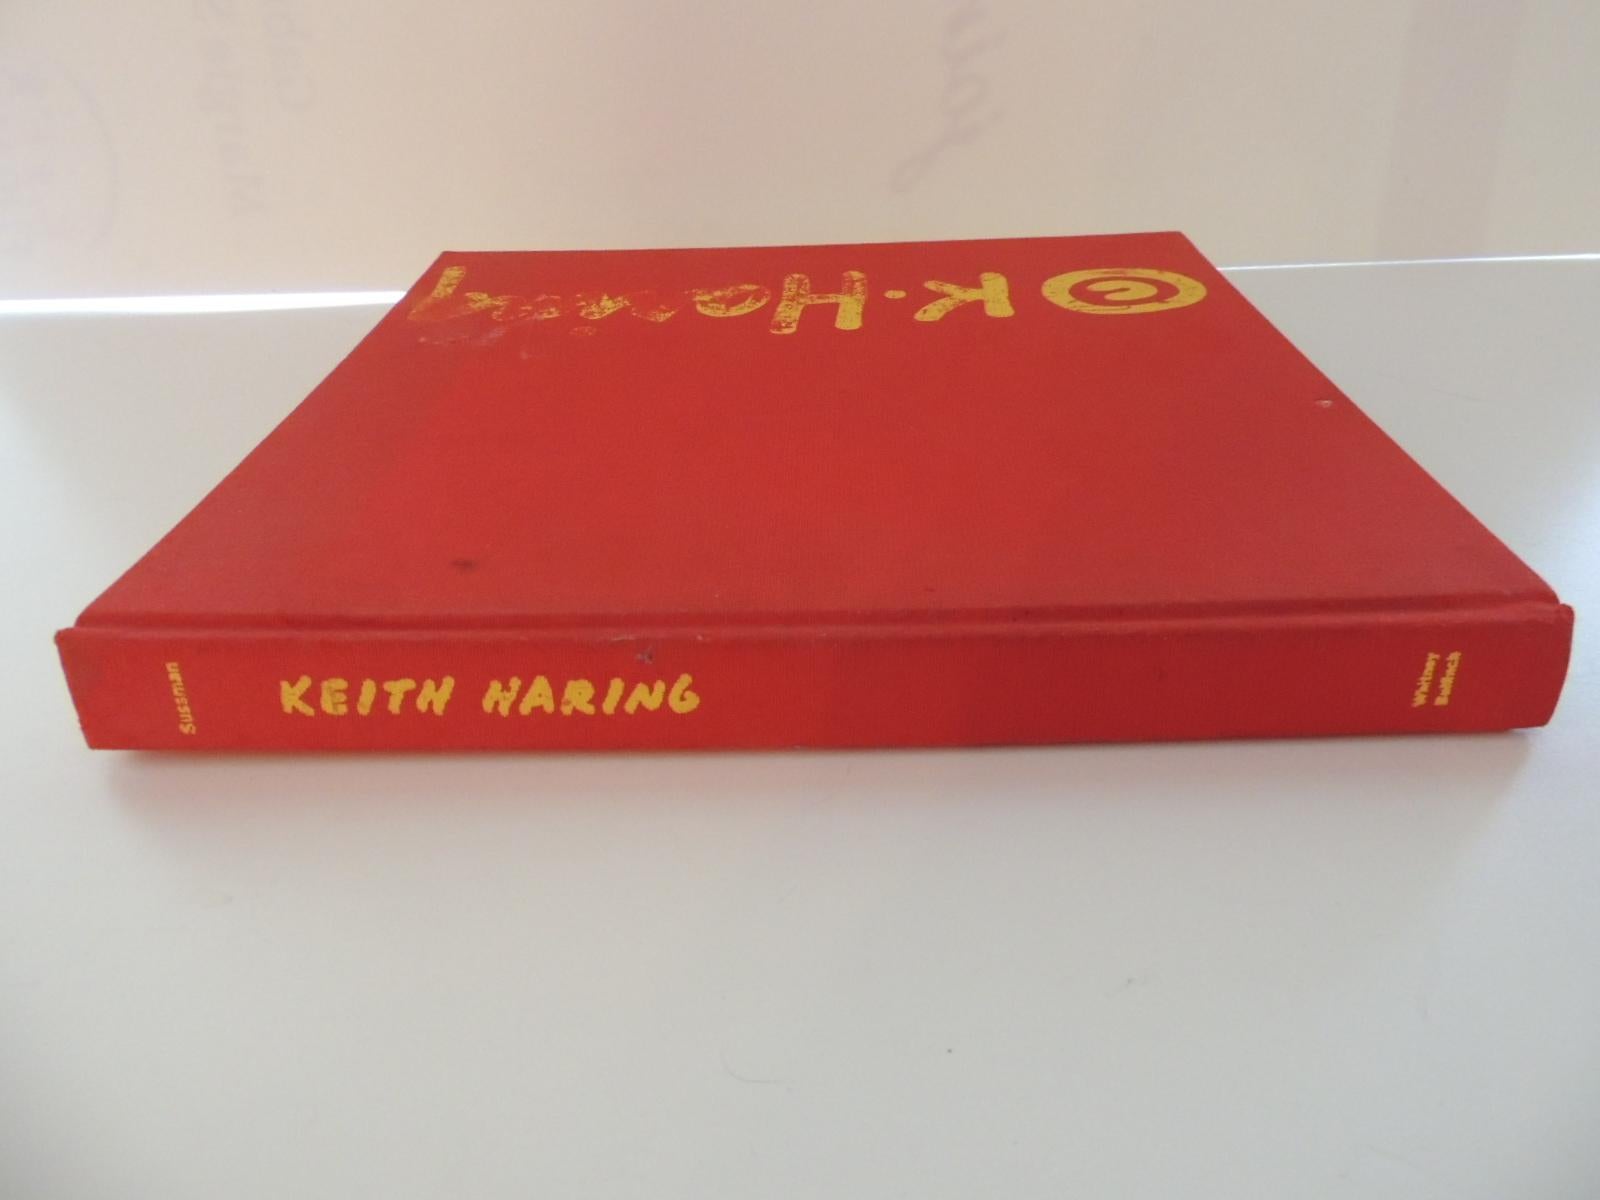 Keith Harris vintage coffee table hardcover book by the Whitney Museum
New York, 1997
Whitney Museum of American Art
296 Pages
Size: 12 x 13 x 1


From $90 to $1,000.